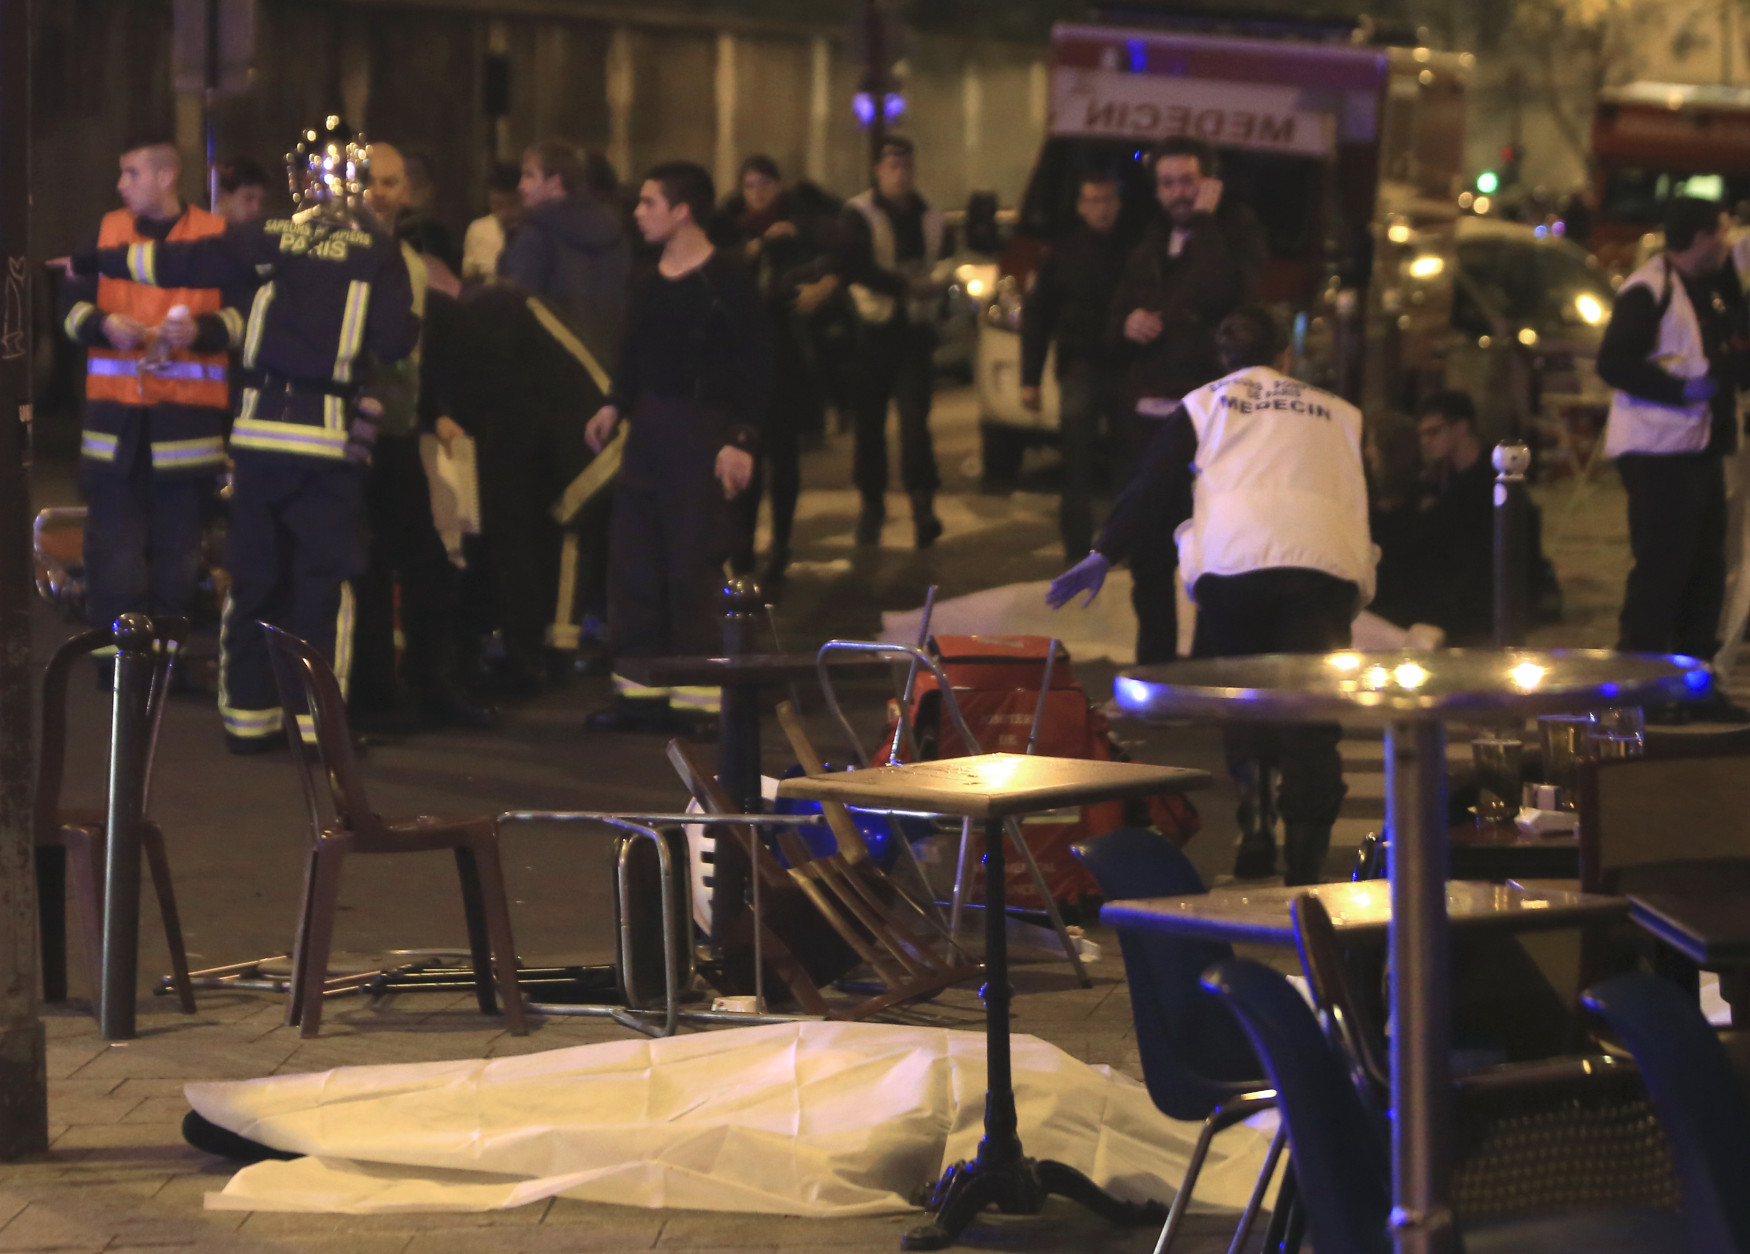 RETRANSMISSION FOR ALTERNATIVE CROP - Emergency services attewnd the scene as victims lay on the pavement outside a Paris restaurant, Friday, Nov. 13, 2015.  Police officials in France on Friday report multiple terror incidents, leaving many dead.  It was unclear at this stage if the events are linked. (AP Photo/Thibault Camus)